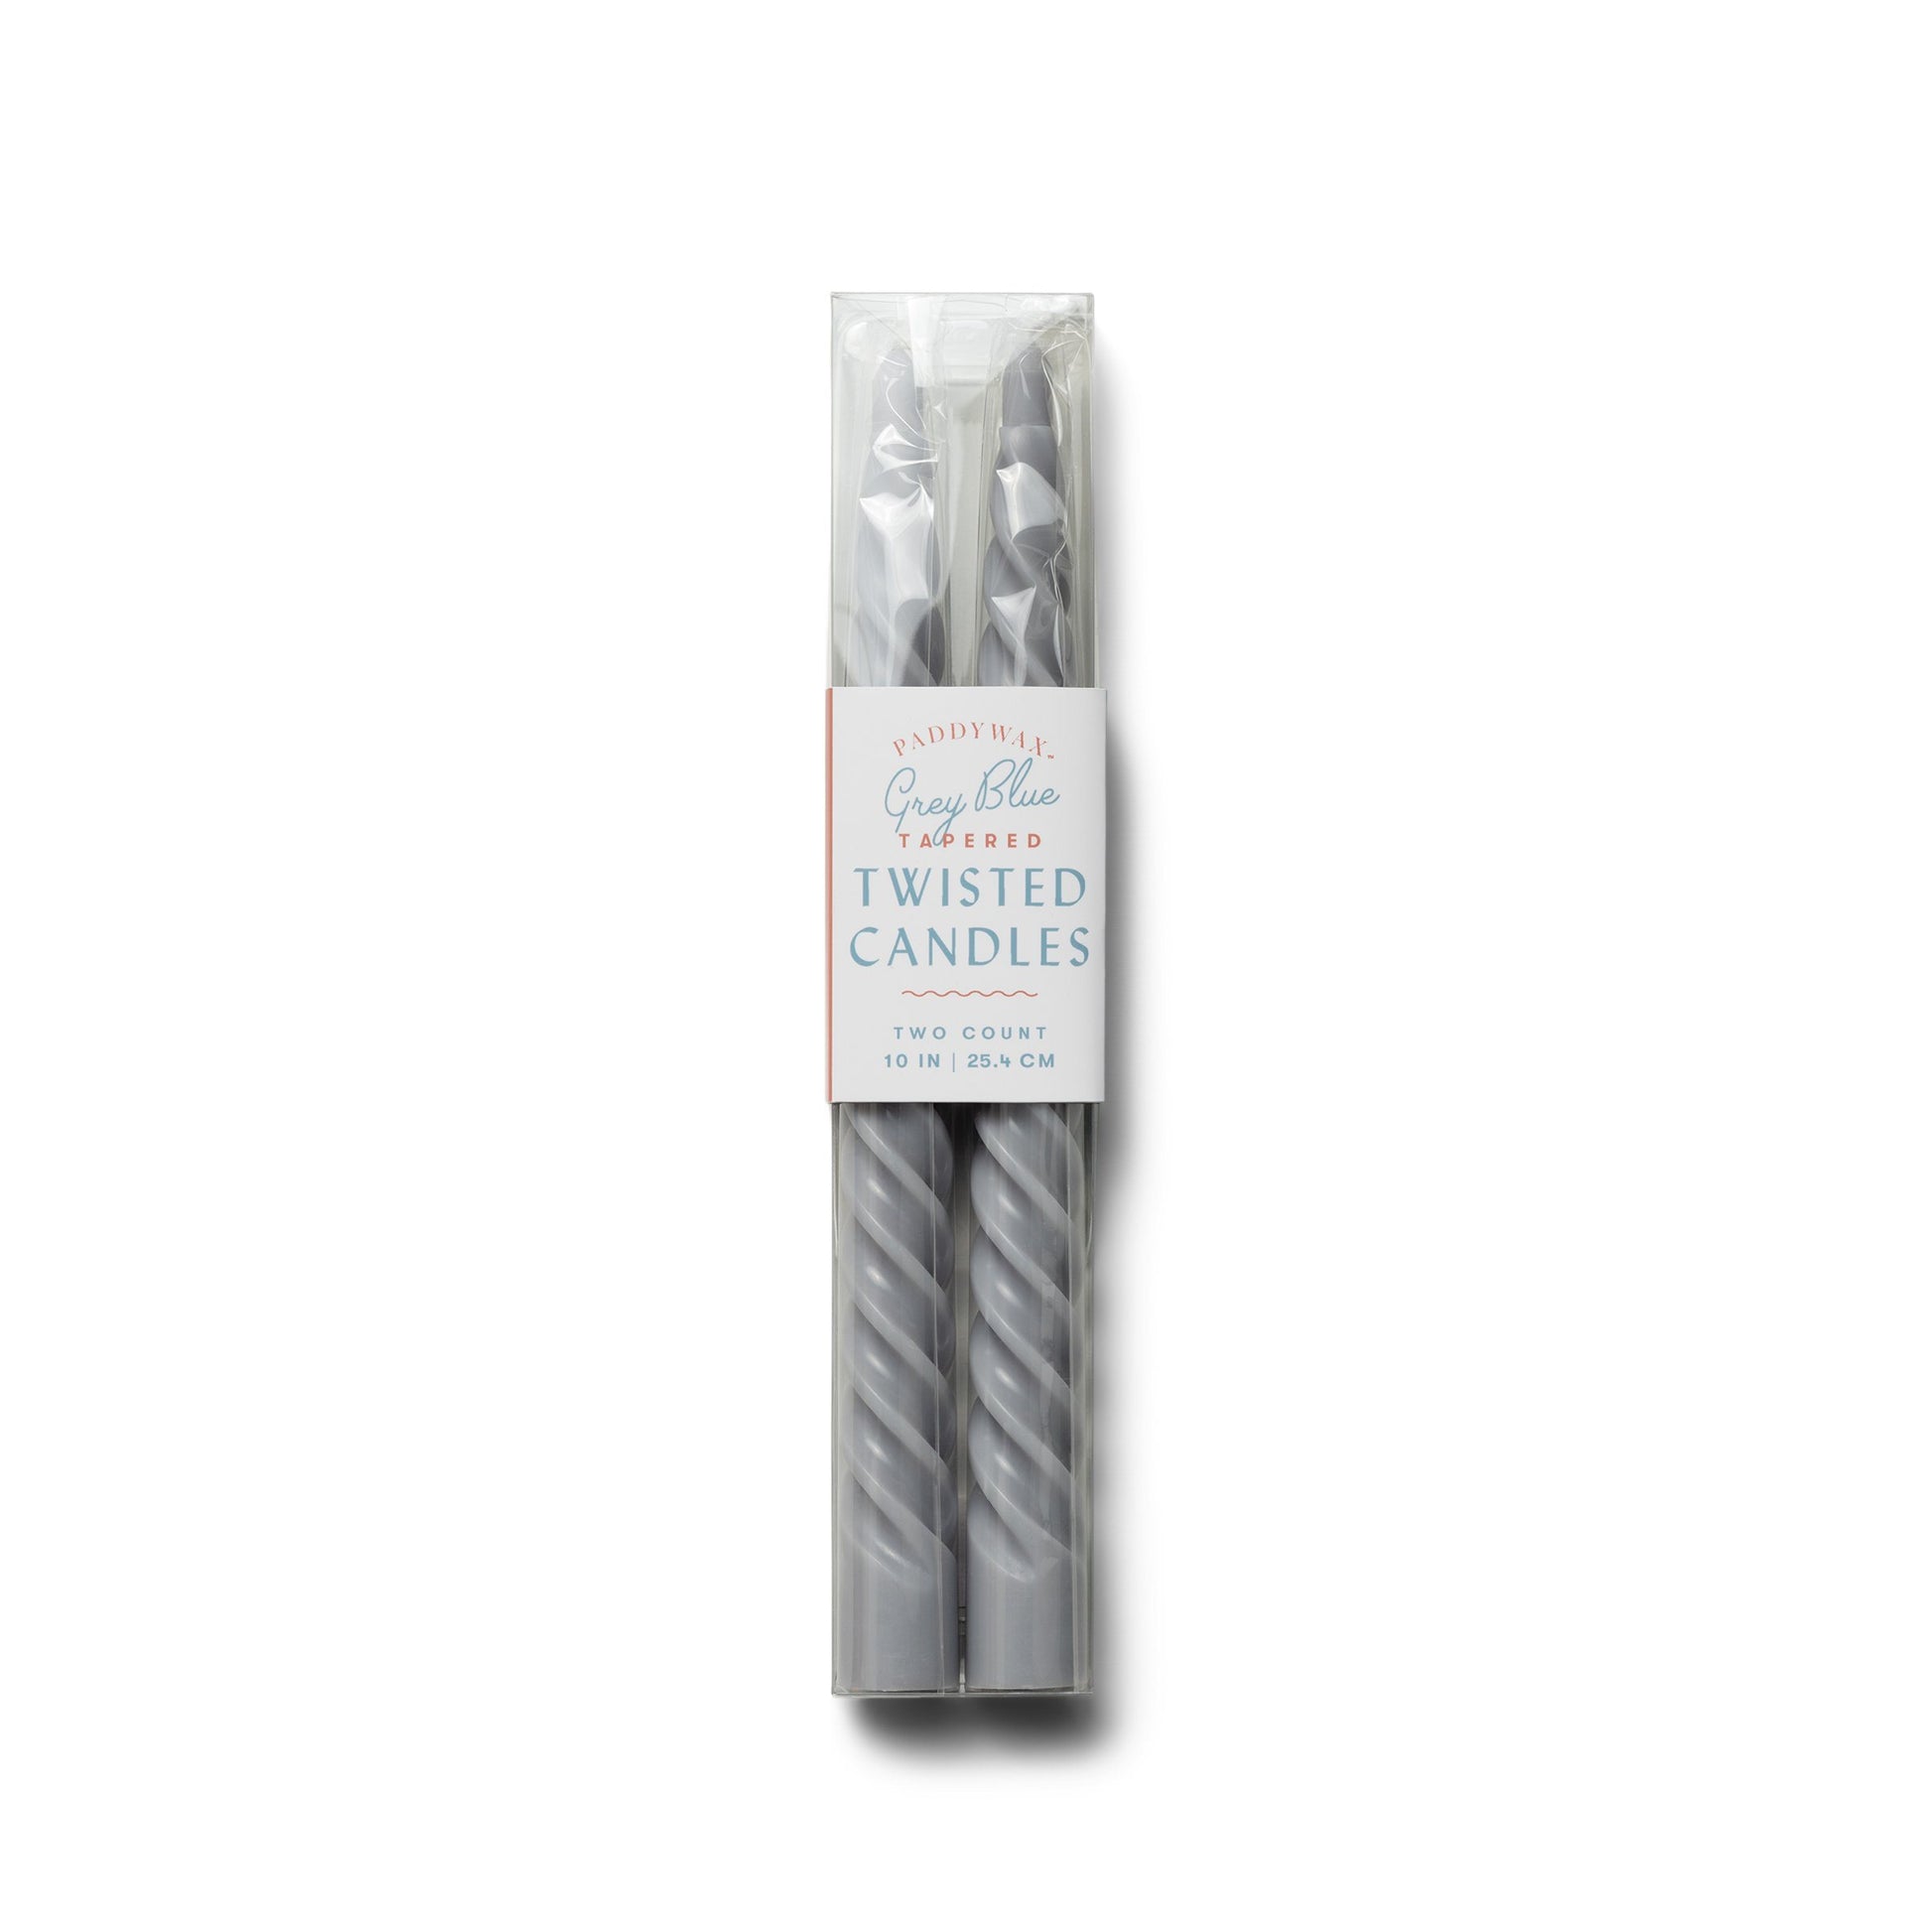 Two 10” gray twisted tapers pictured in a clear package with a white label